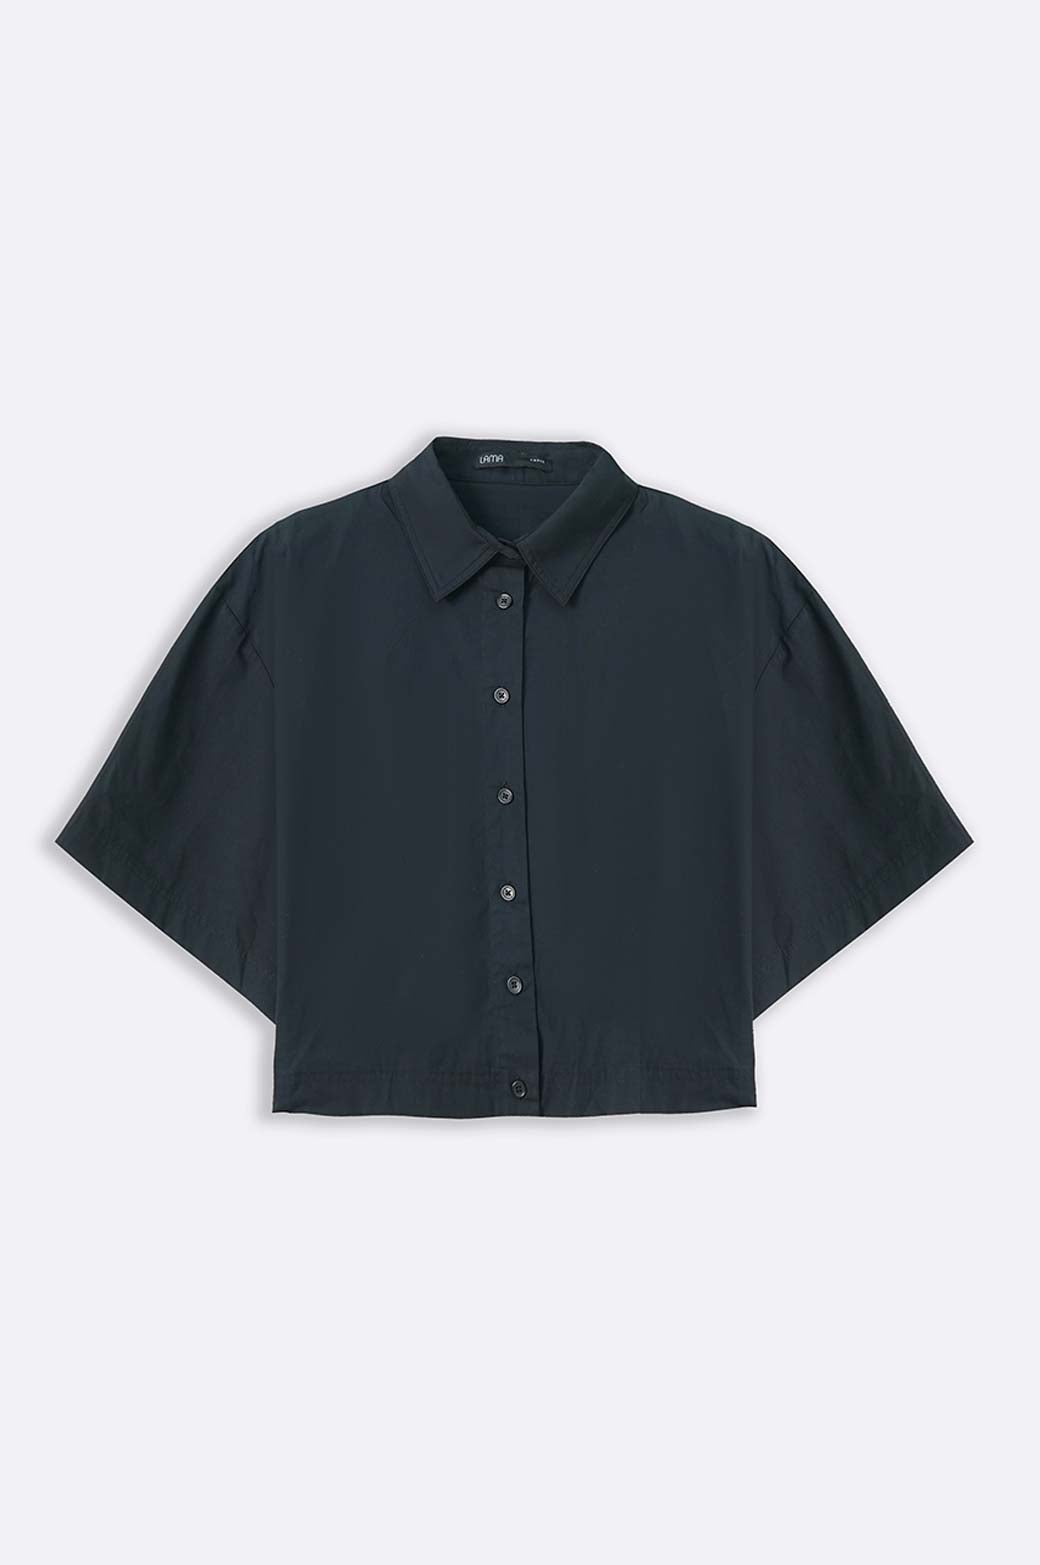 BLACK SHORT SHIRT WITH STRETCHY BACK